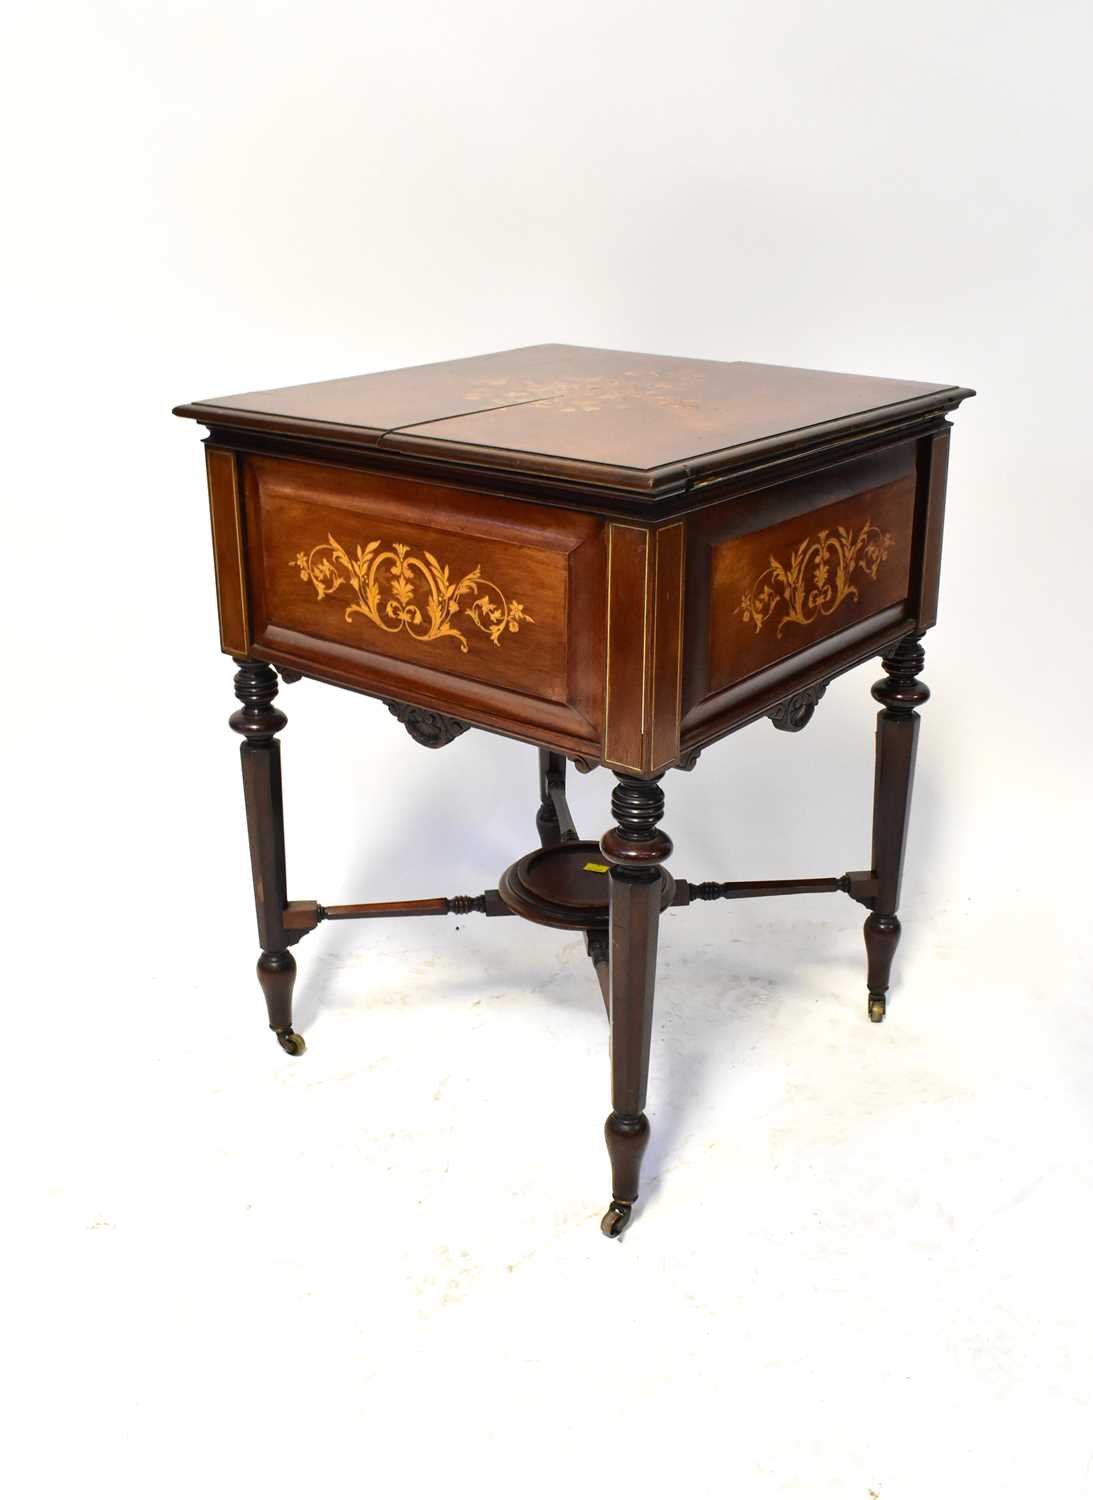 An early 19th century rosewood and floral marquetry inlaid 'Eclipse' drinks cabinet, the moulded